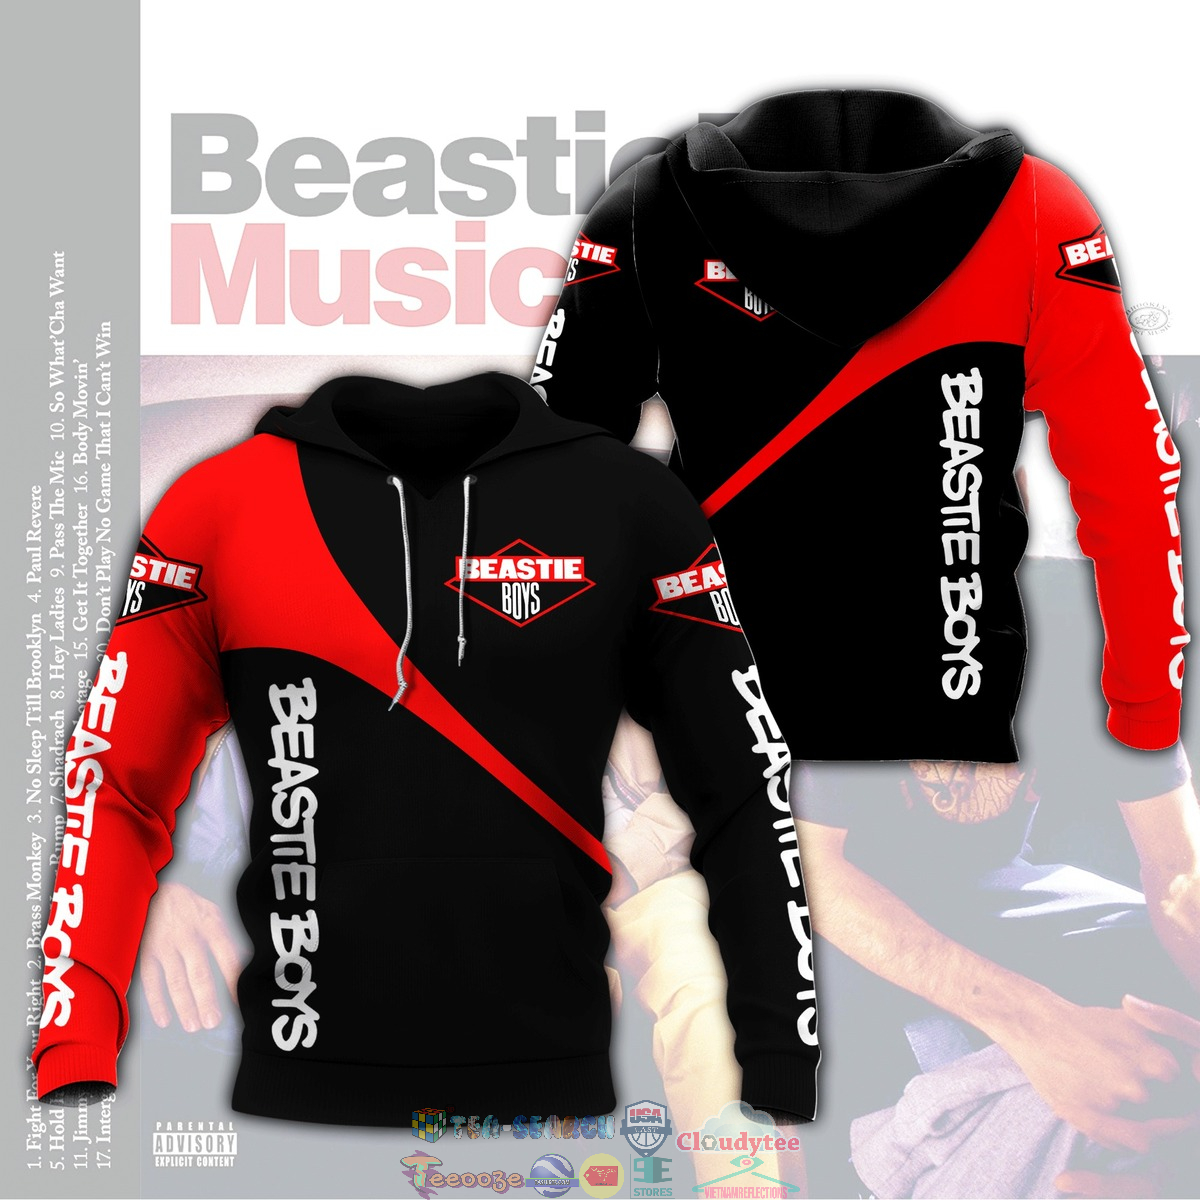 Beastie Boys Band ver 6 3D hoodie and t-shirt